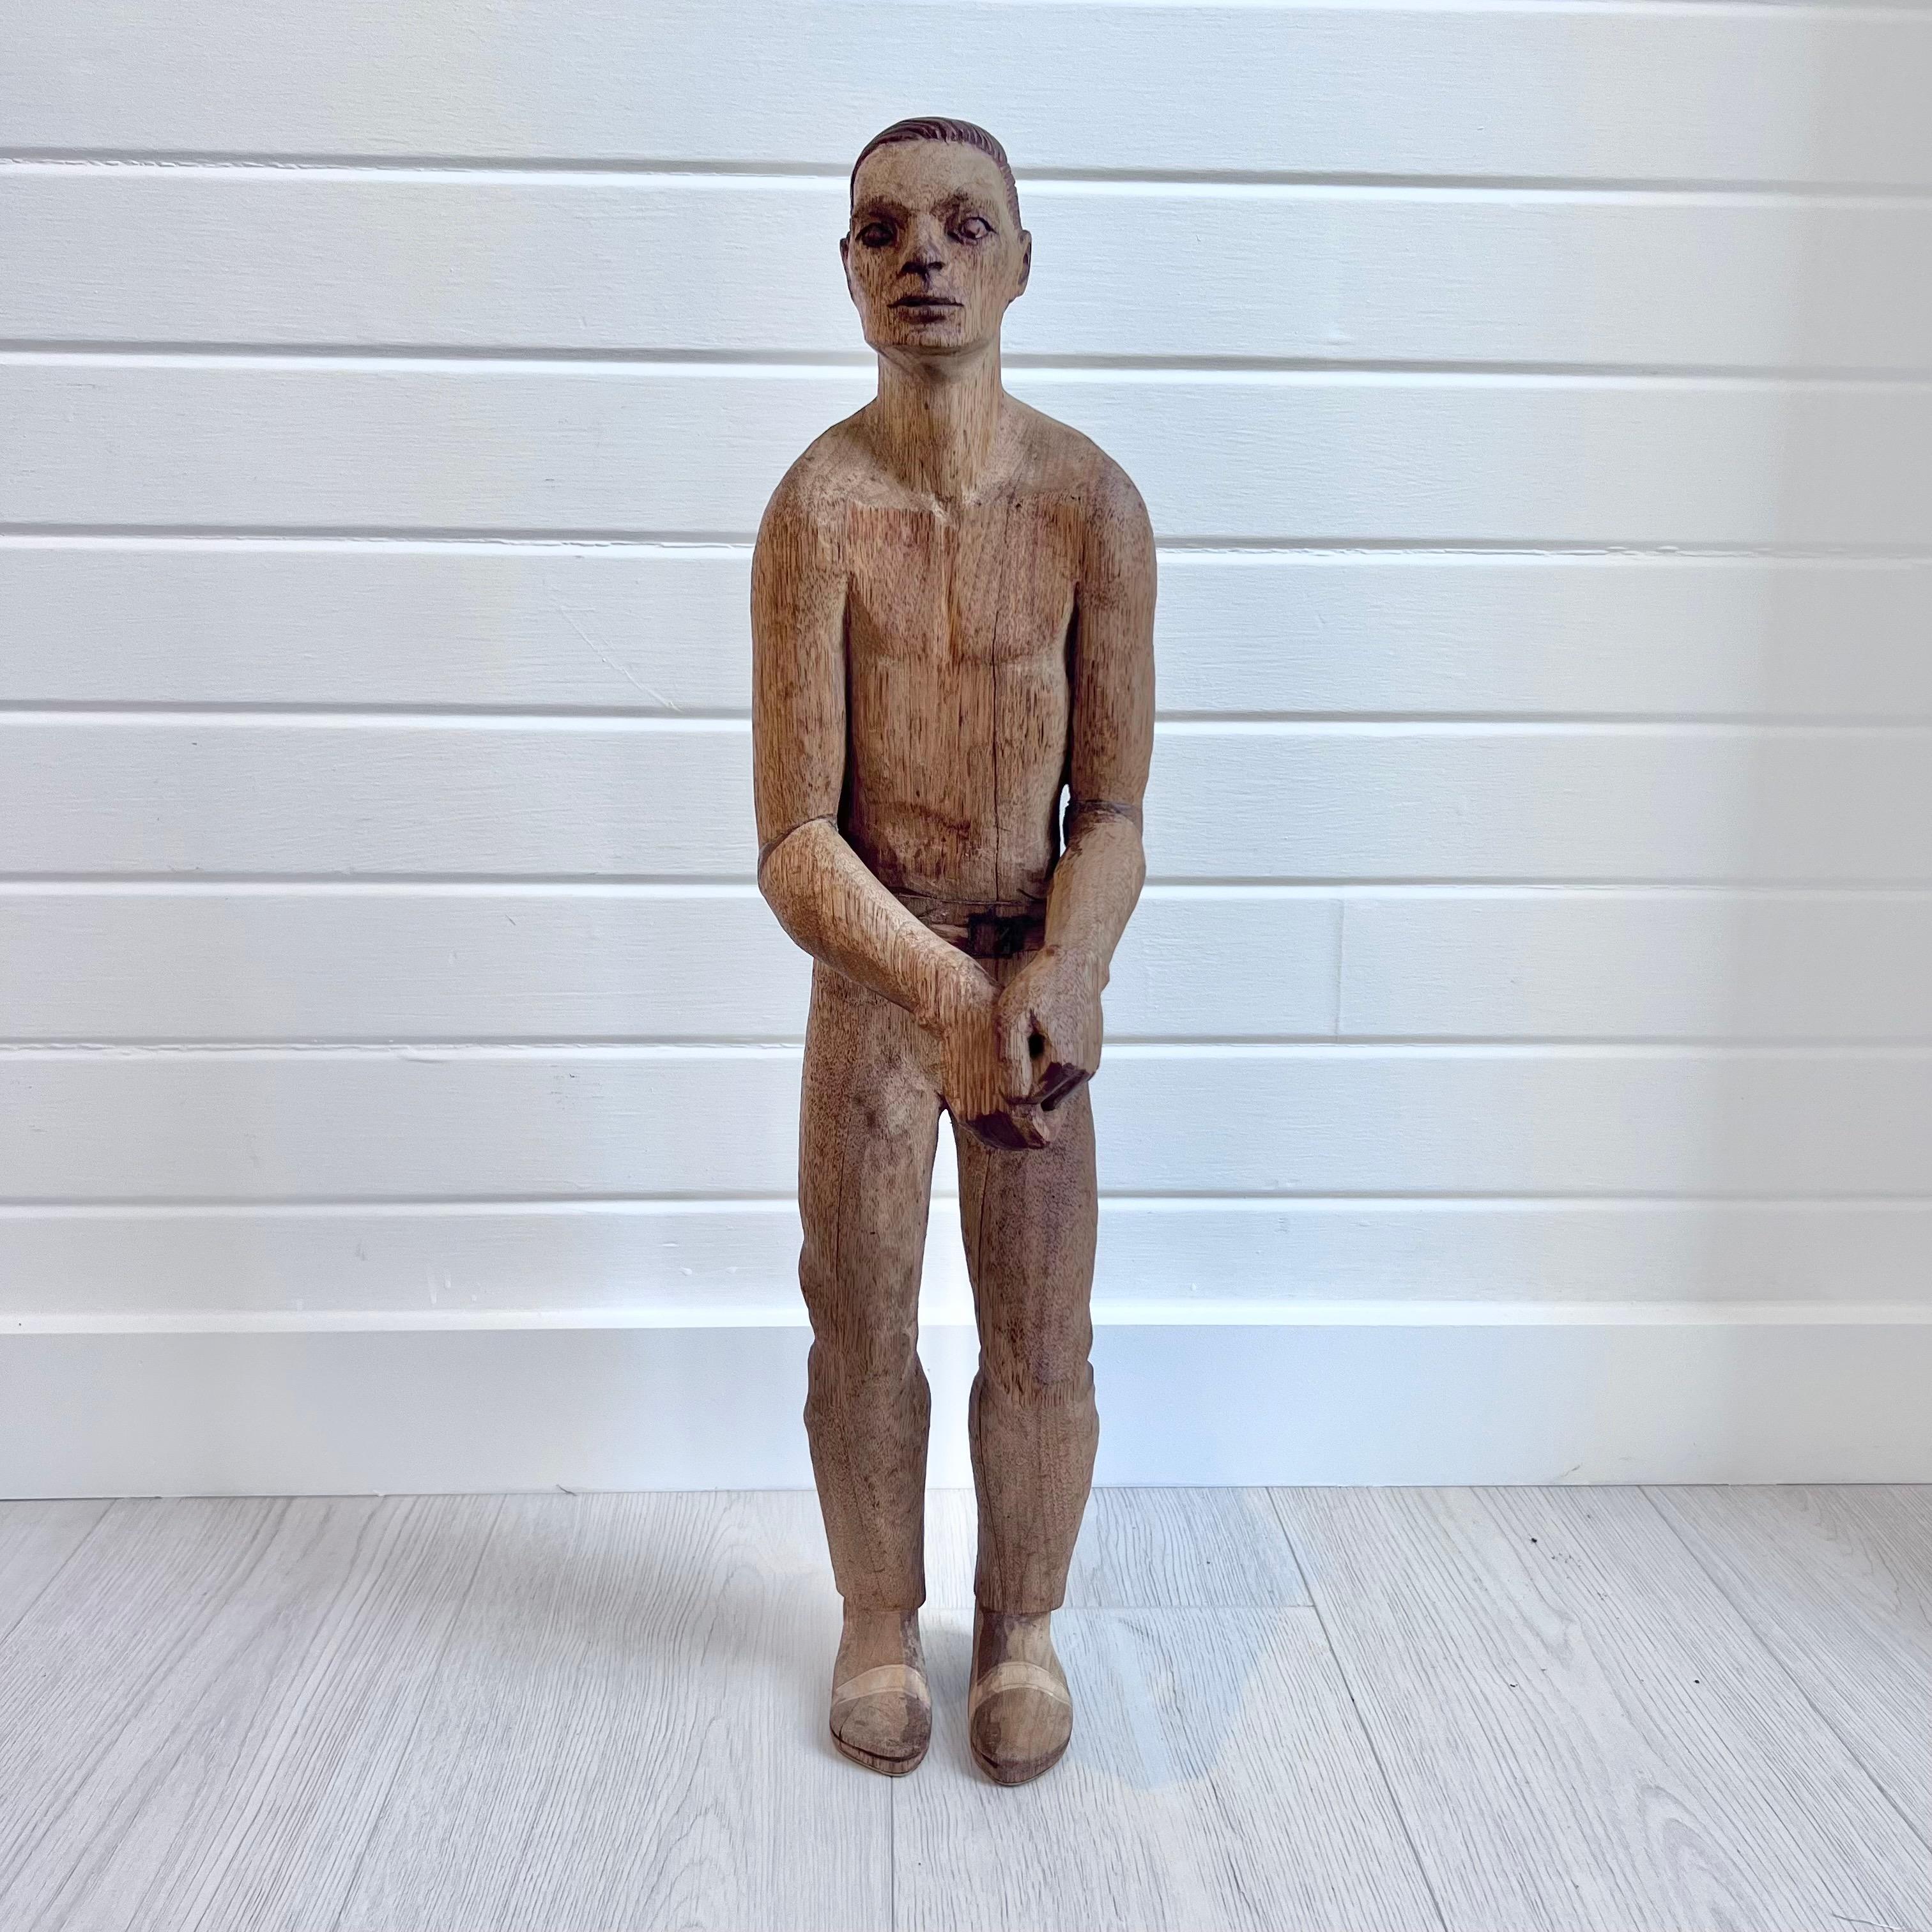 Rare and unusual late 19th/early 20th century antique carved wooden folk art male figure from a small fishing town on the east coast of the United States.

The wooden figure is carved from a single piece of wood and depicts a naively carved man with